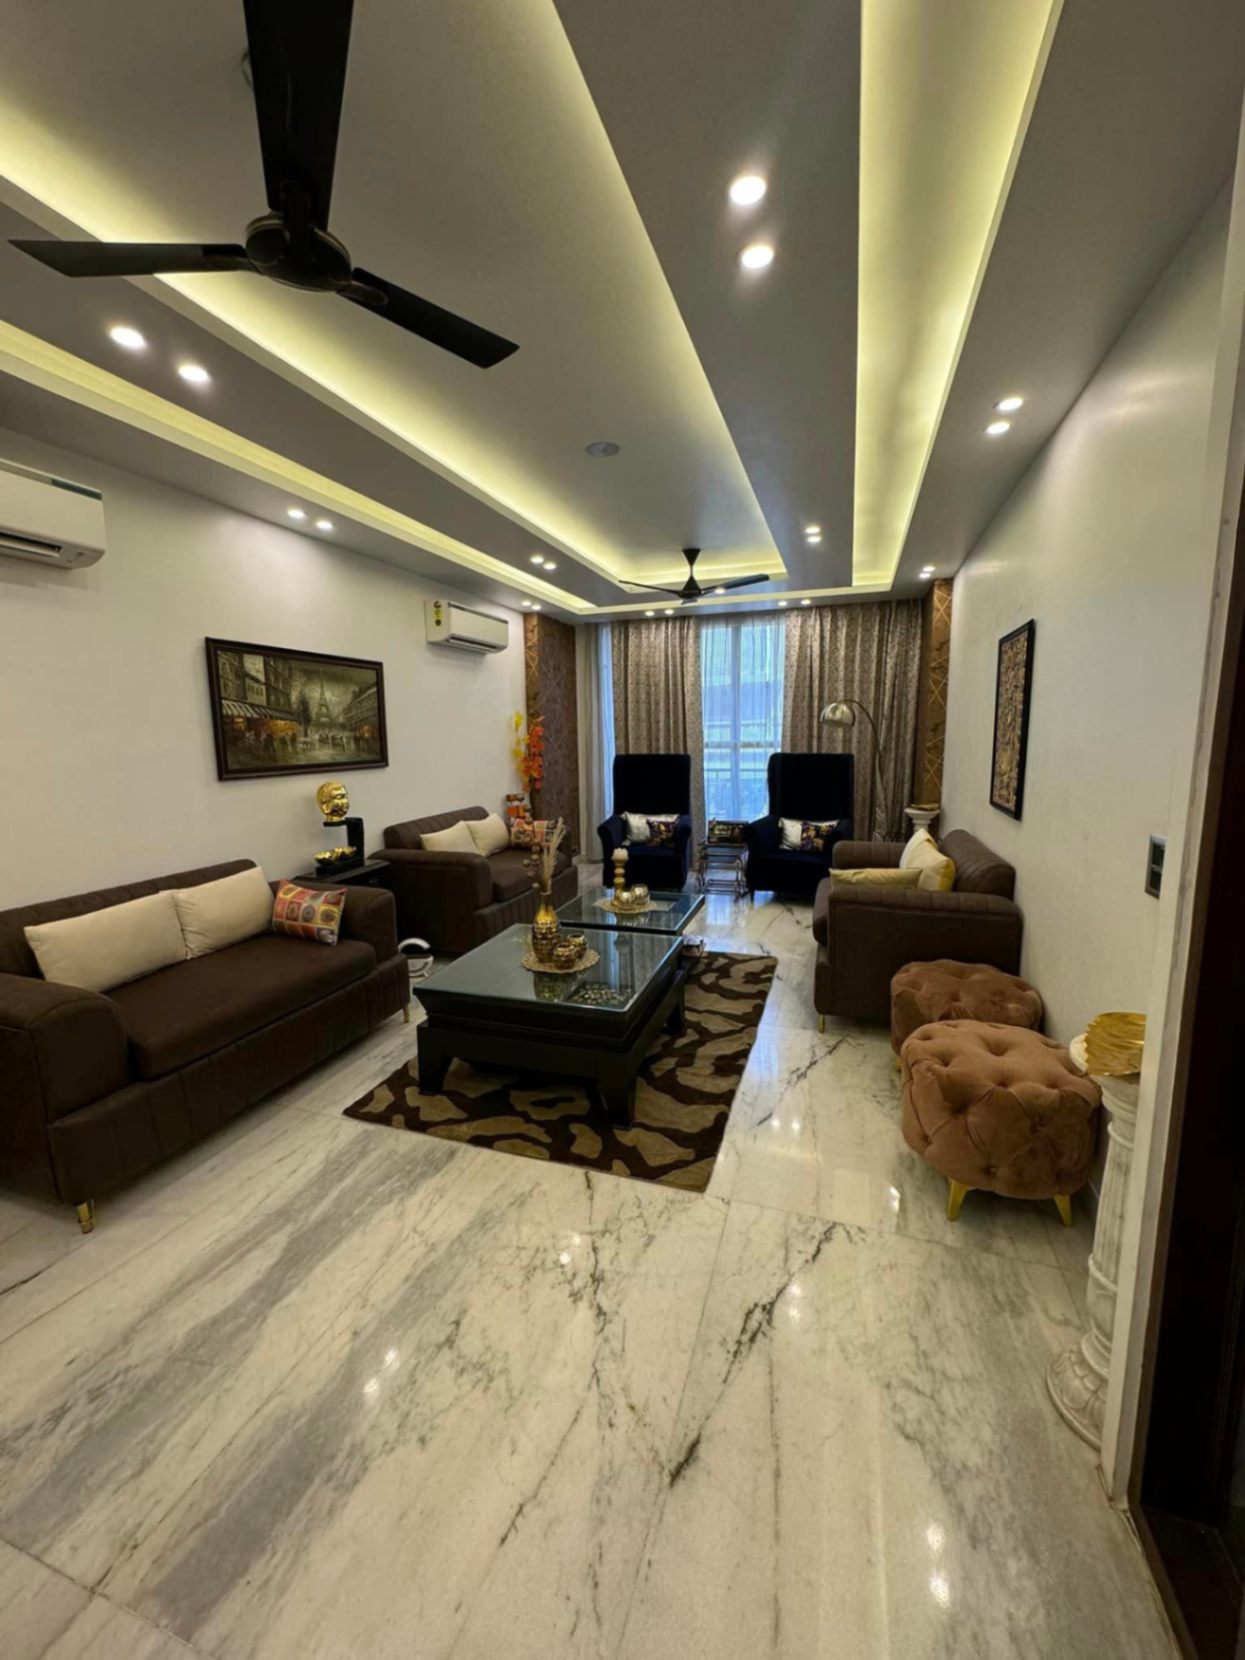 3 Bed/ 3 Bath Rent Apartment/ Flat; 2,178 sq. ft. carpet area, Furnished for rent @Greter Kailash